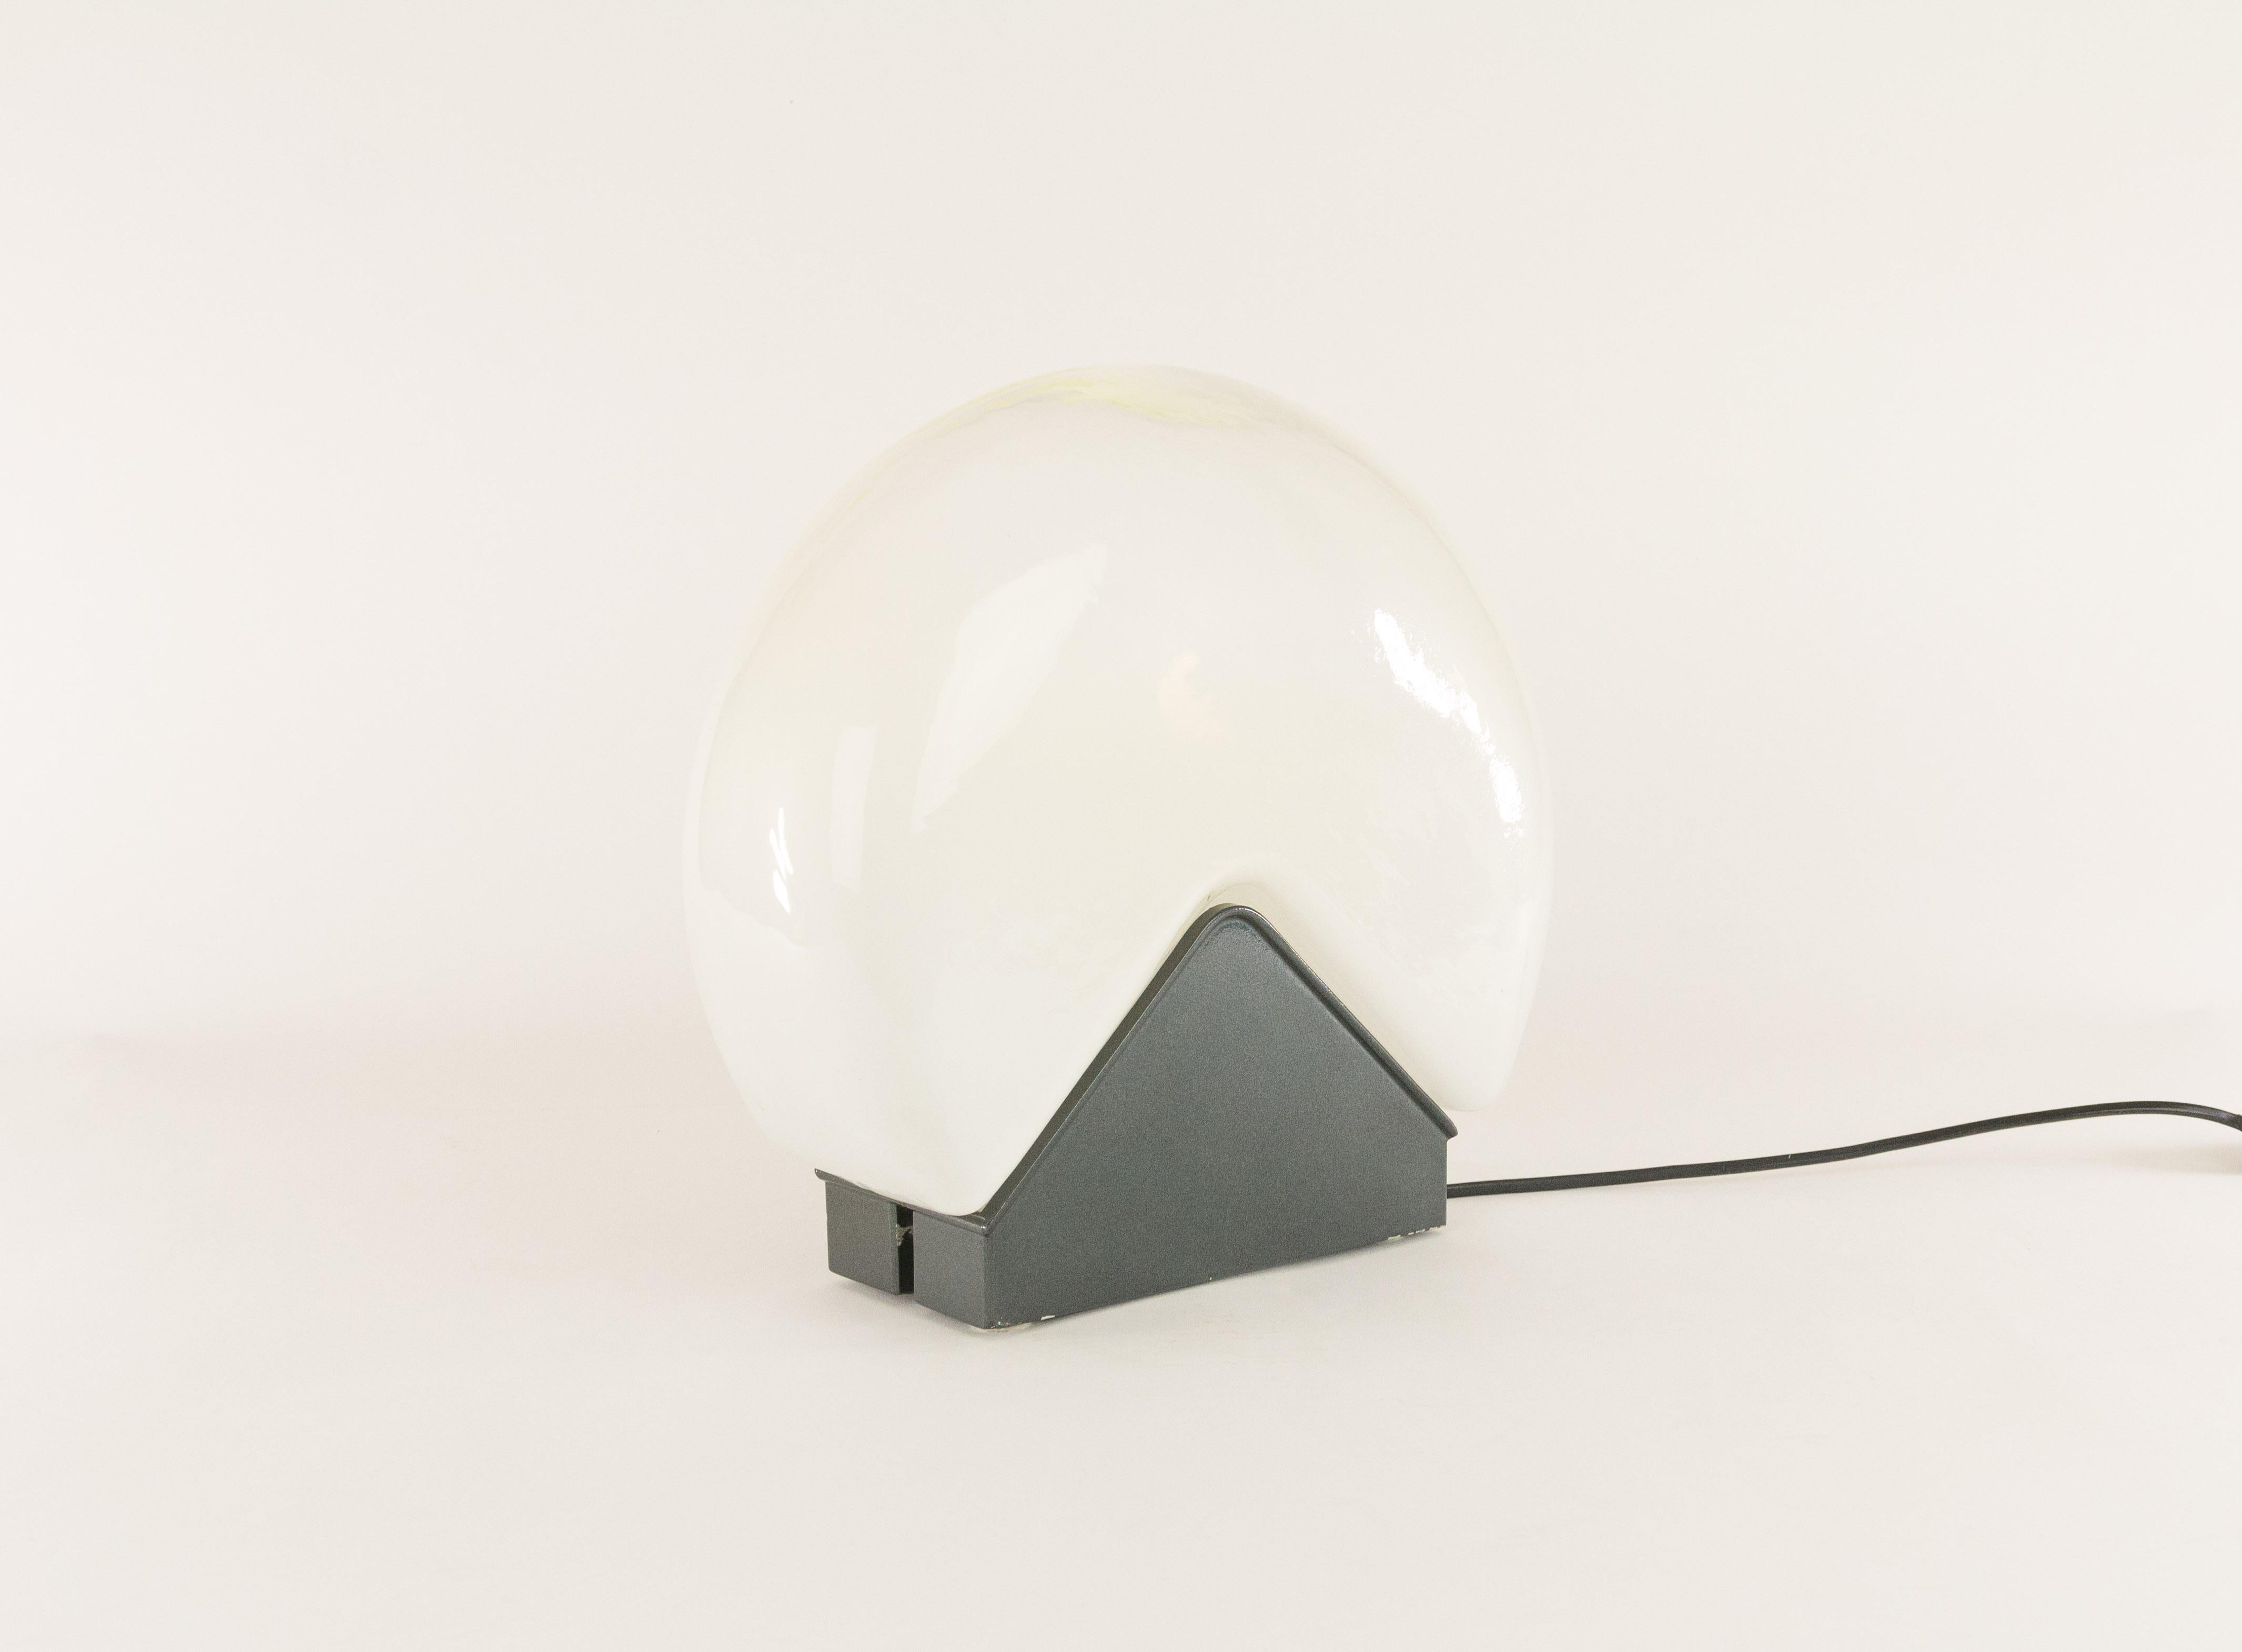 Mid-Century Modern Glass Table Lamp by Roberto Pamio for Leucos from the 1970s For Sale